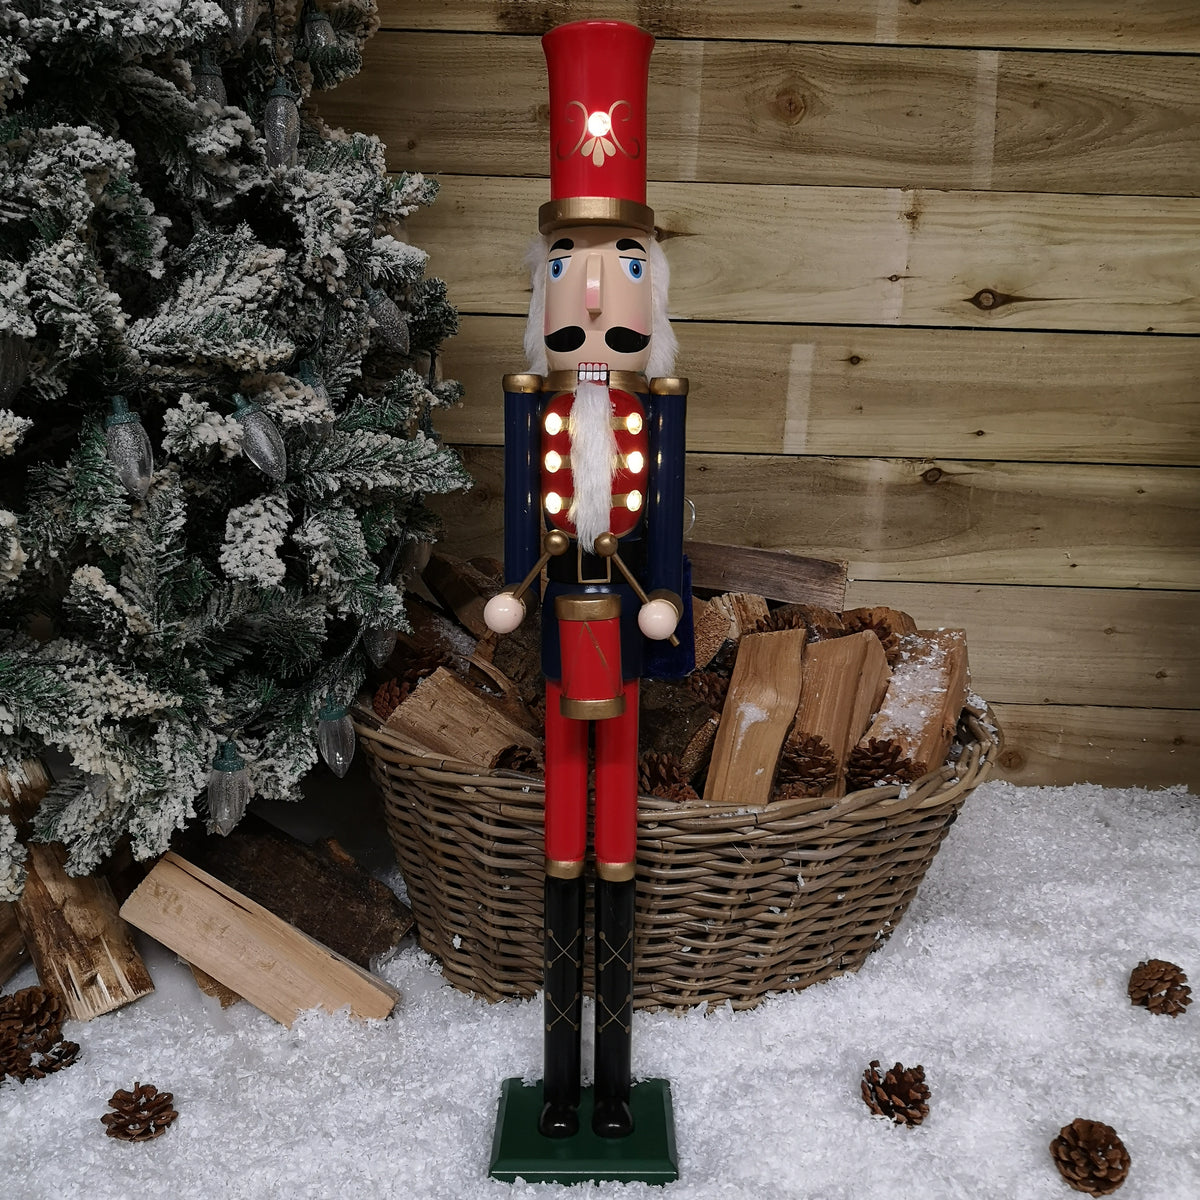 76cm LED Battery Operated Indoor Christmas Wooden Nutcracker Decoration in Blue Jacket